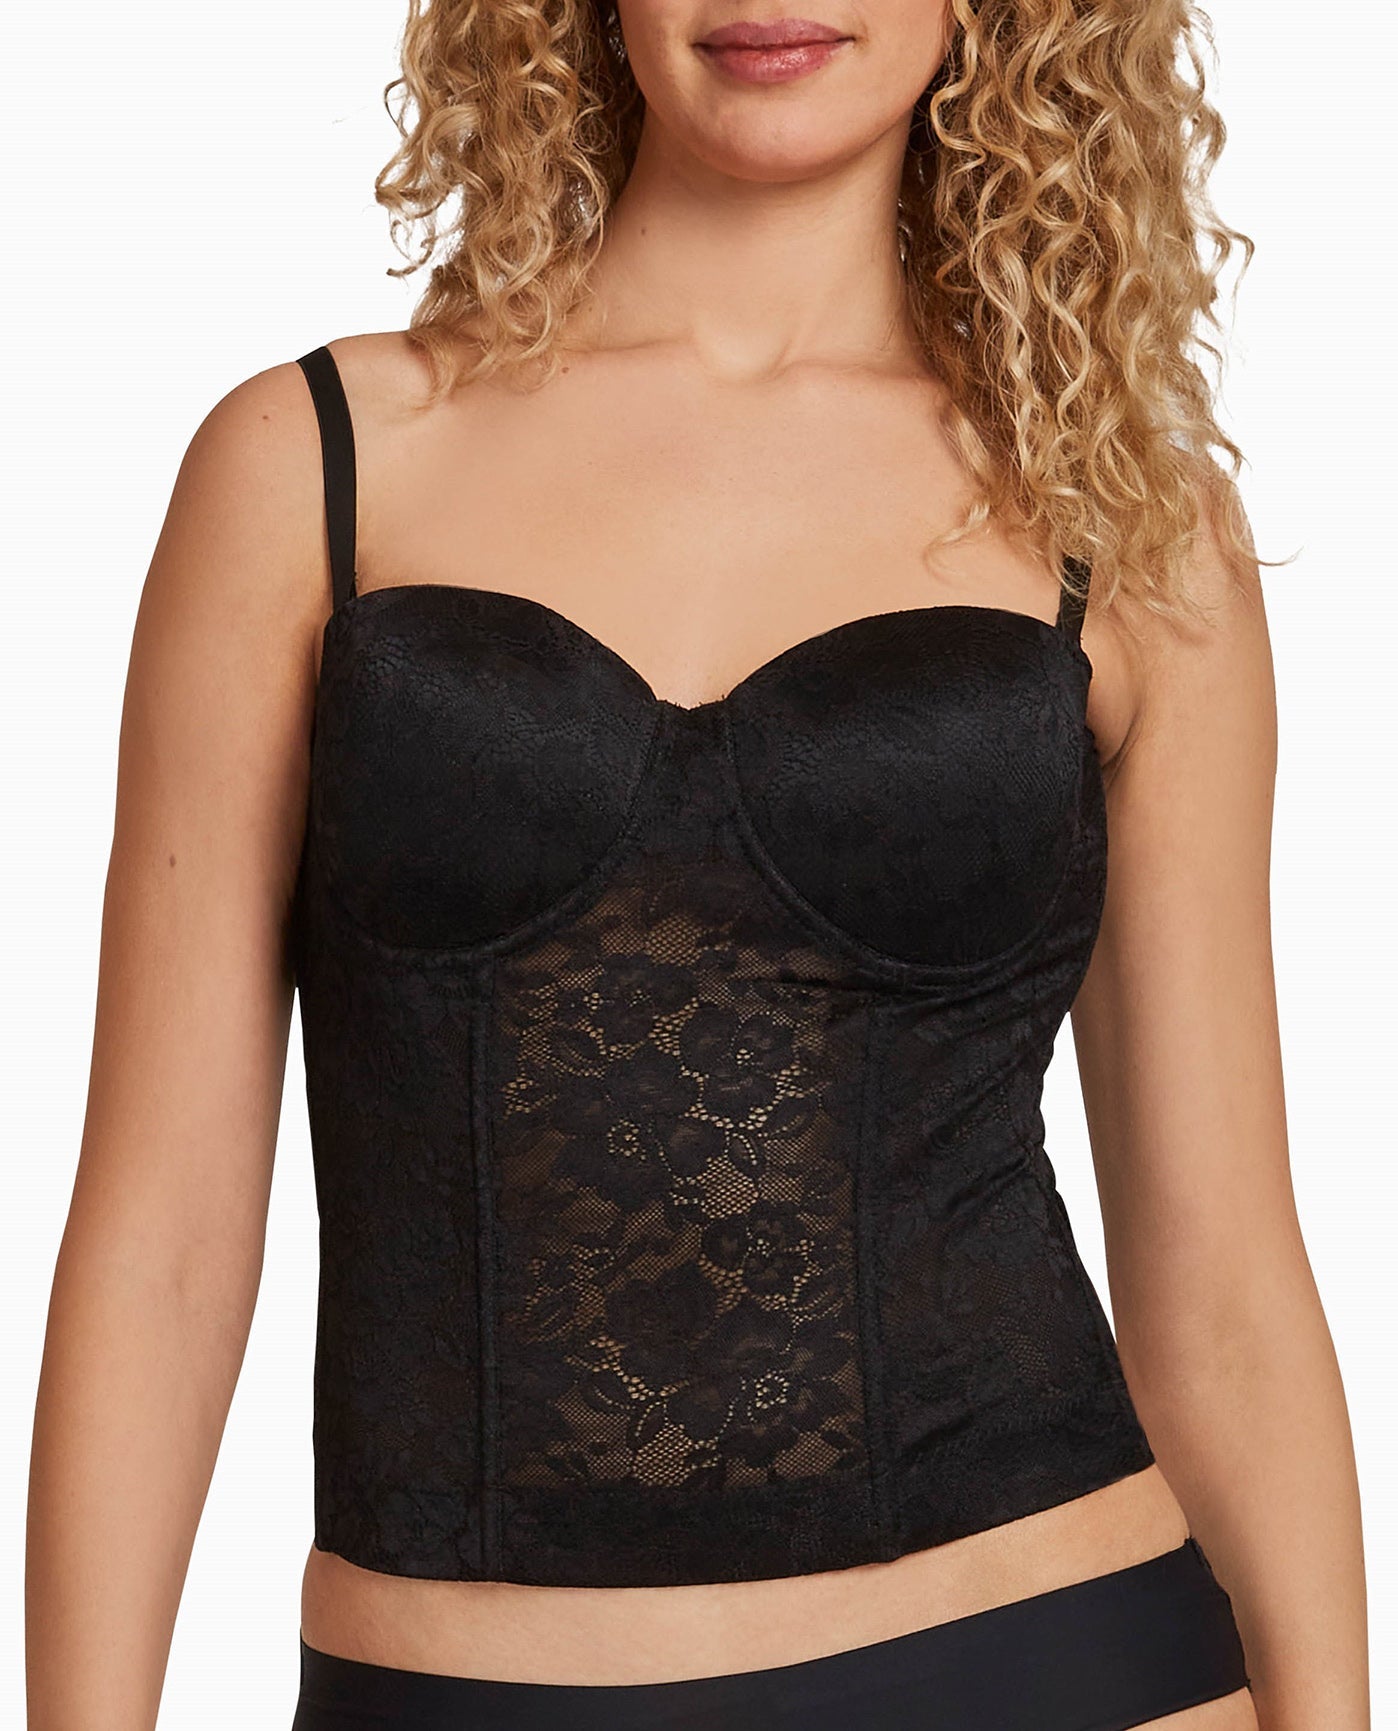 Black and grey lace bustier